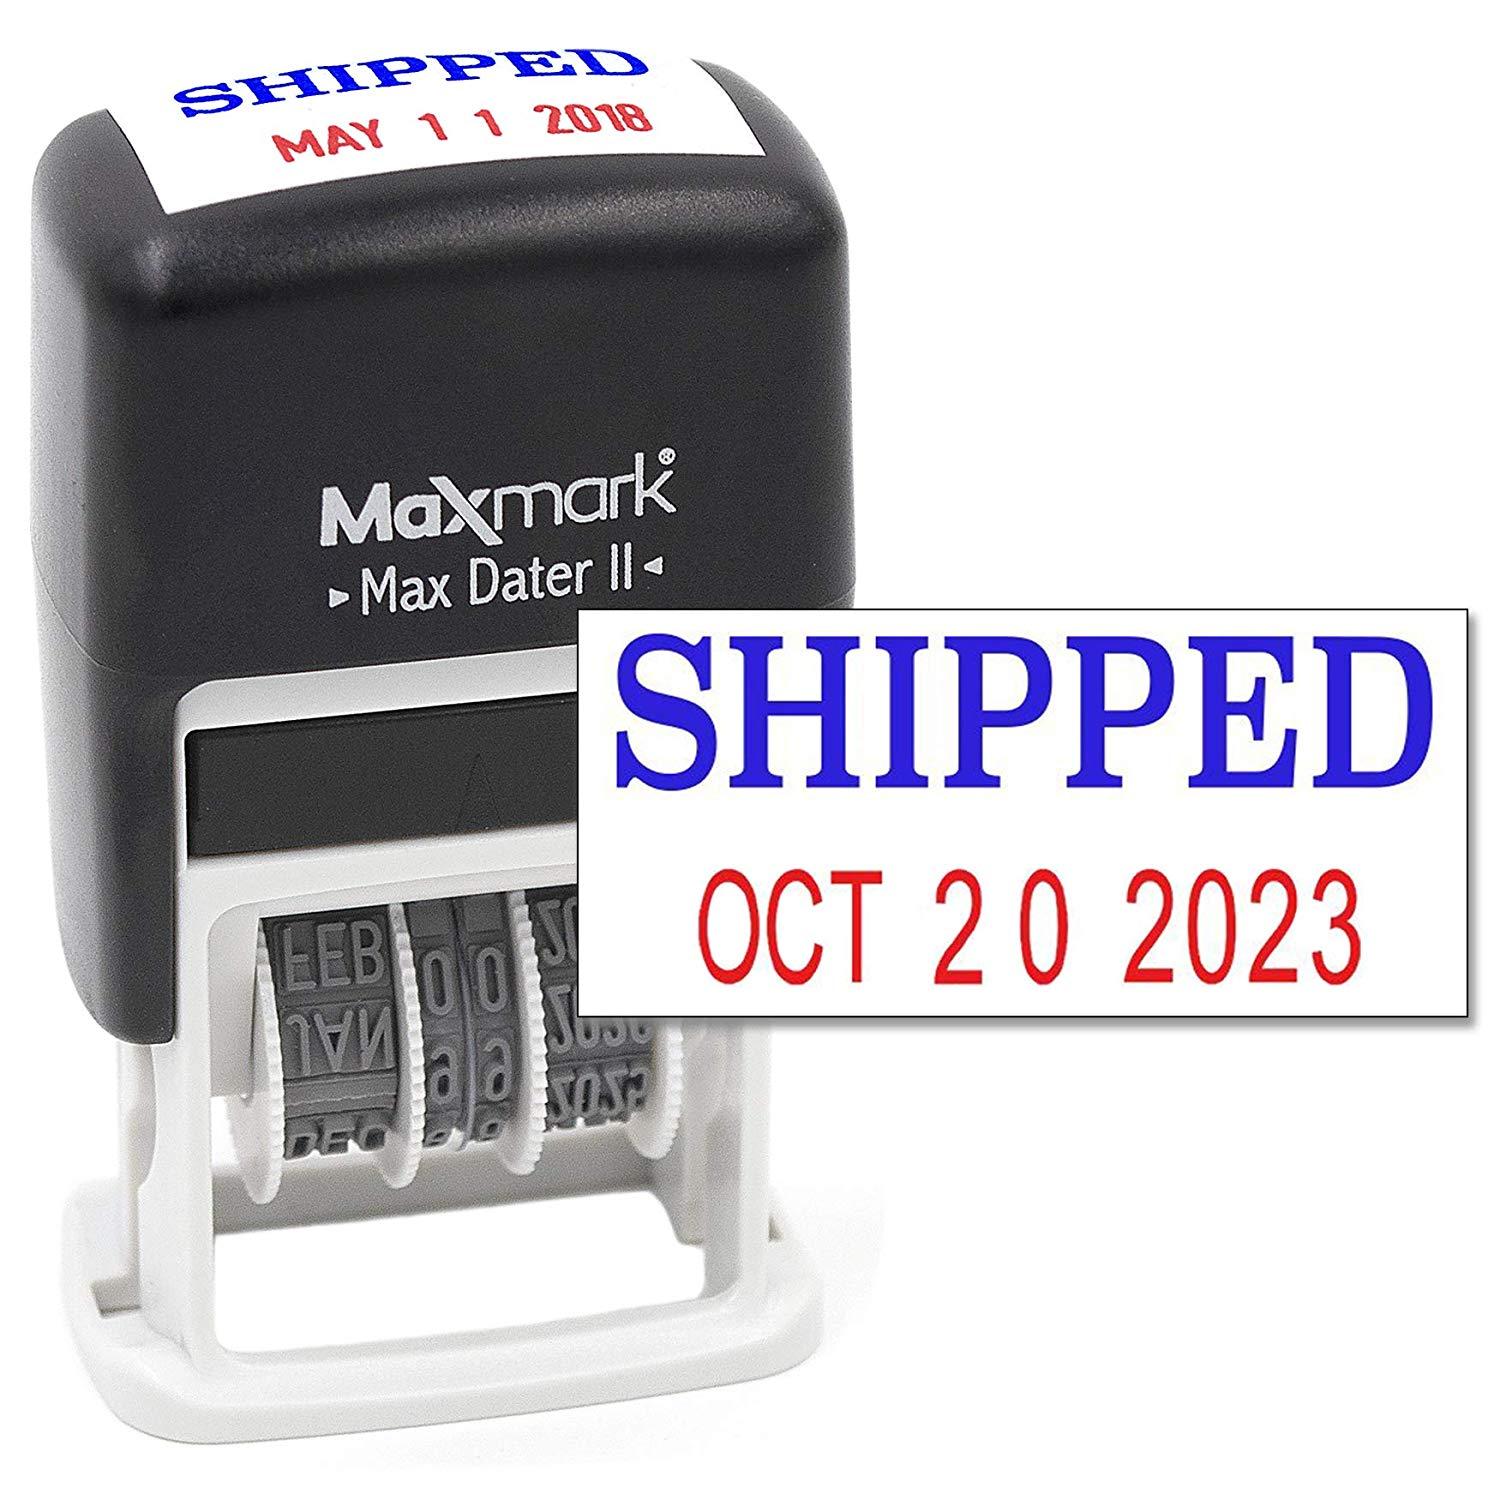 MaxMark Heavy Duty Style Date Stamp with DEPOSITED self Inking Stamp 2 Color Blue/Red Ink 